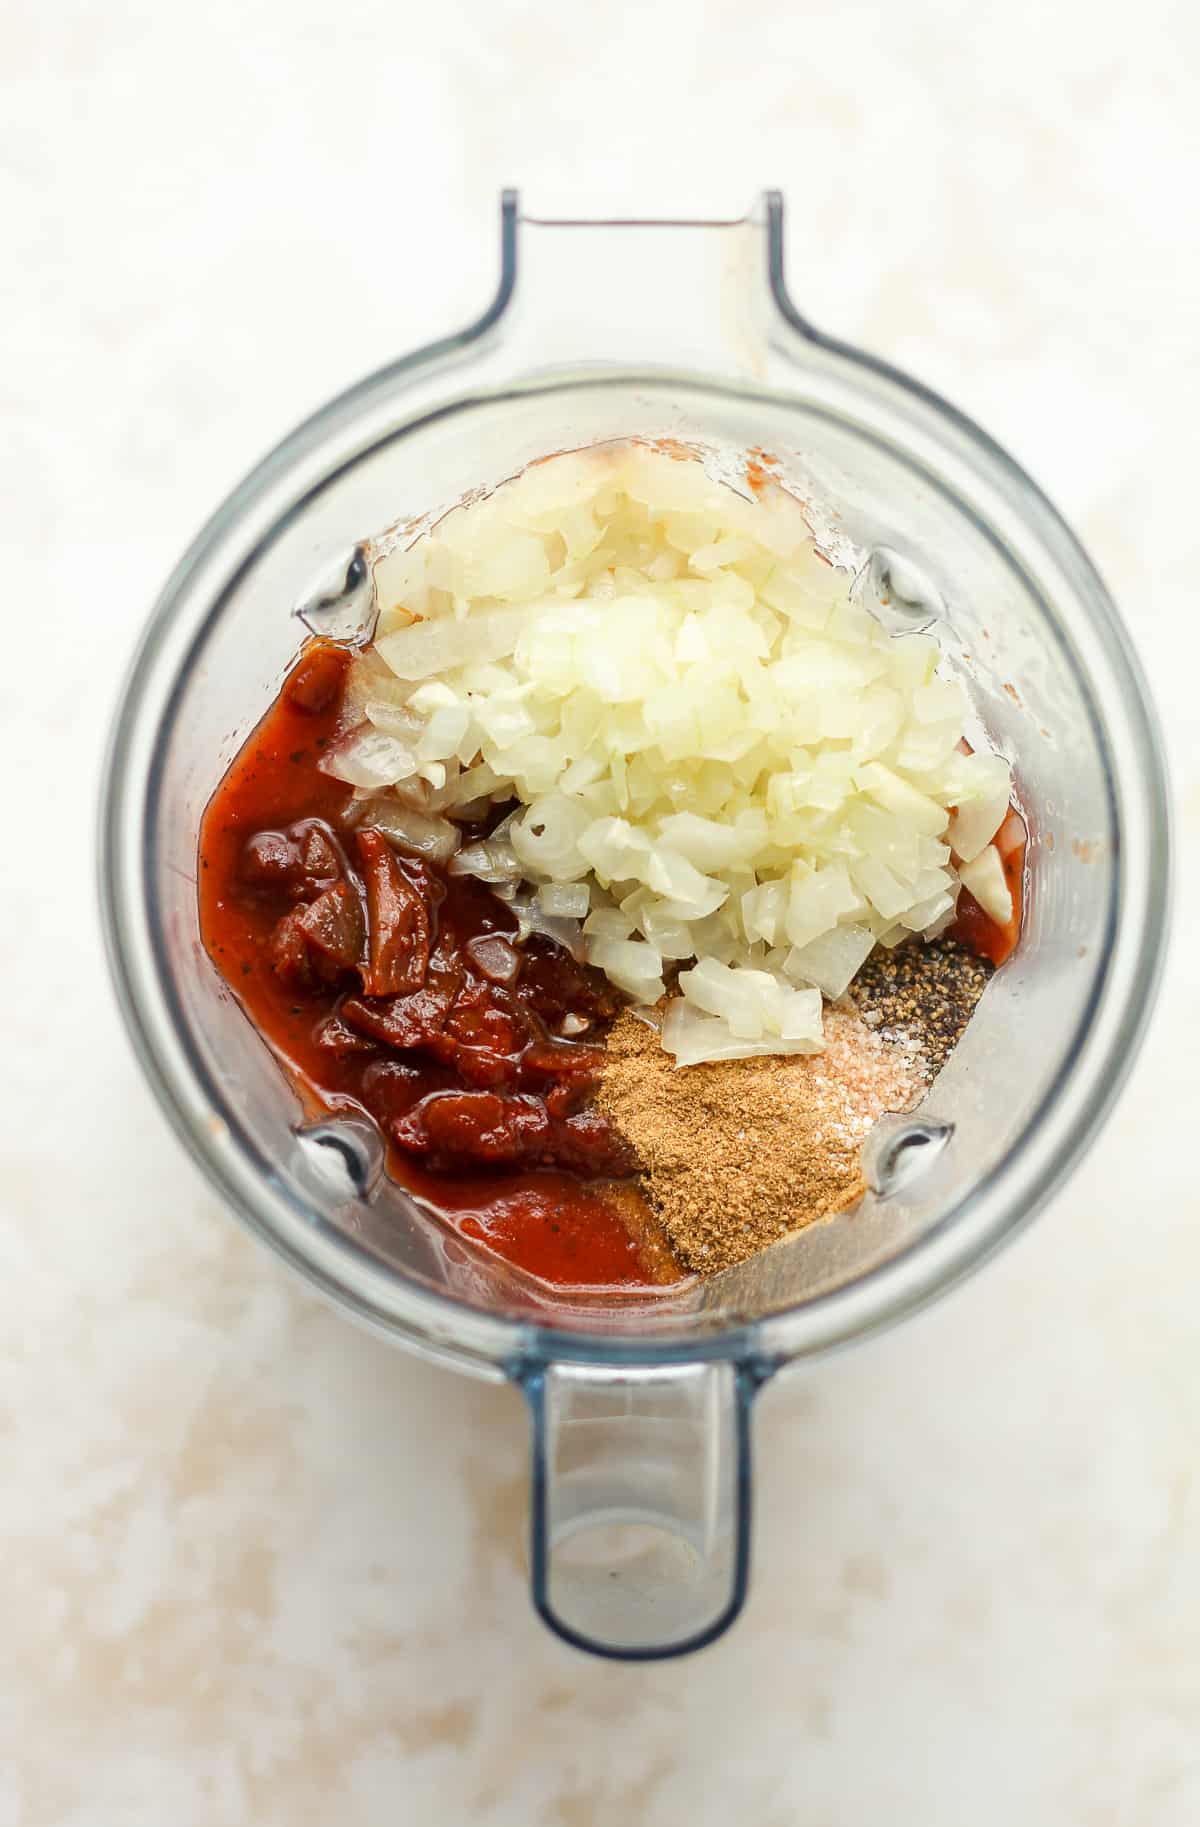 A blender of the sauce with the onions on top.